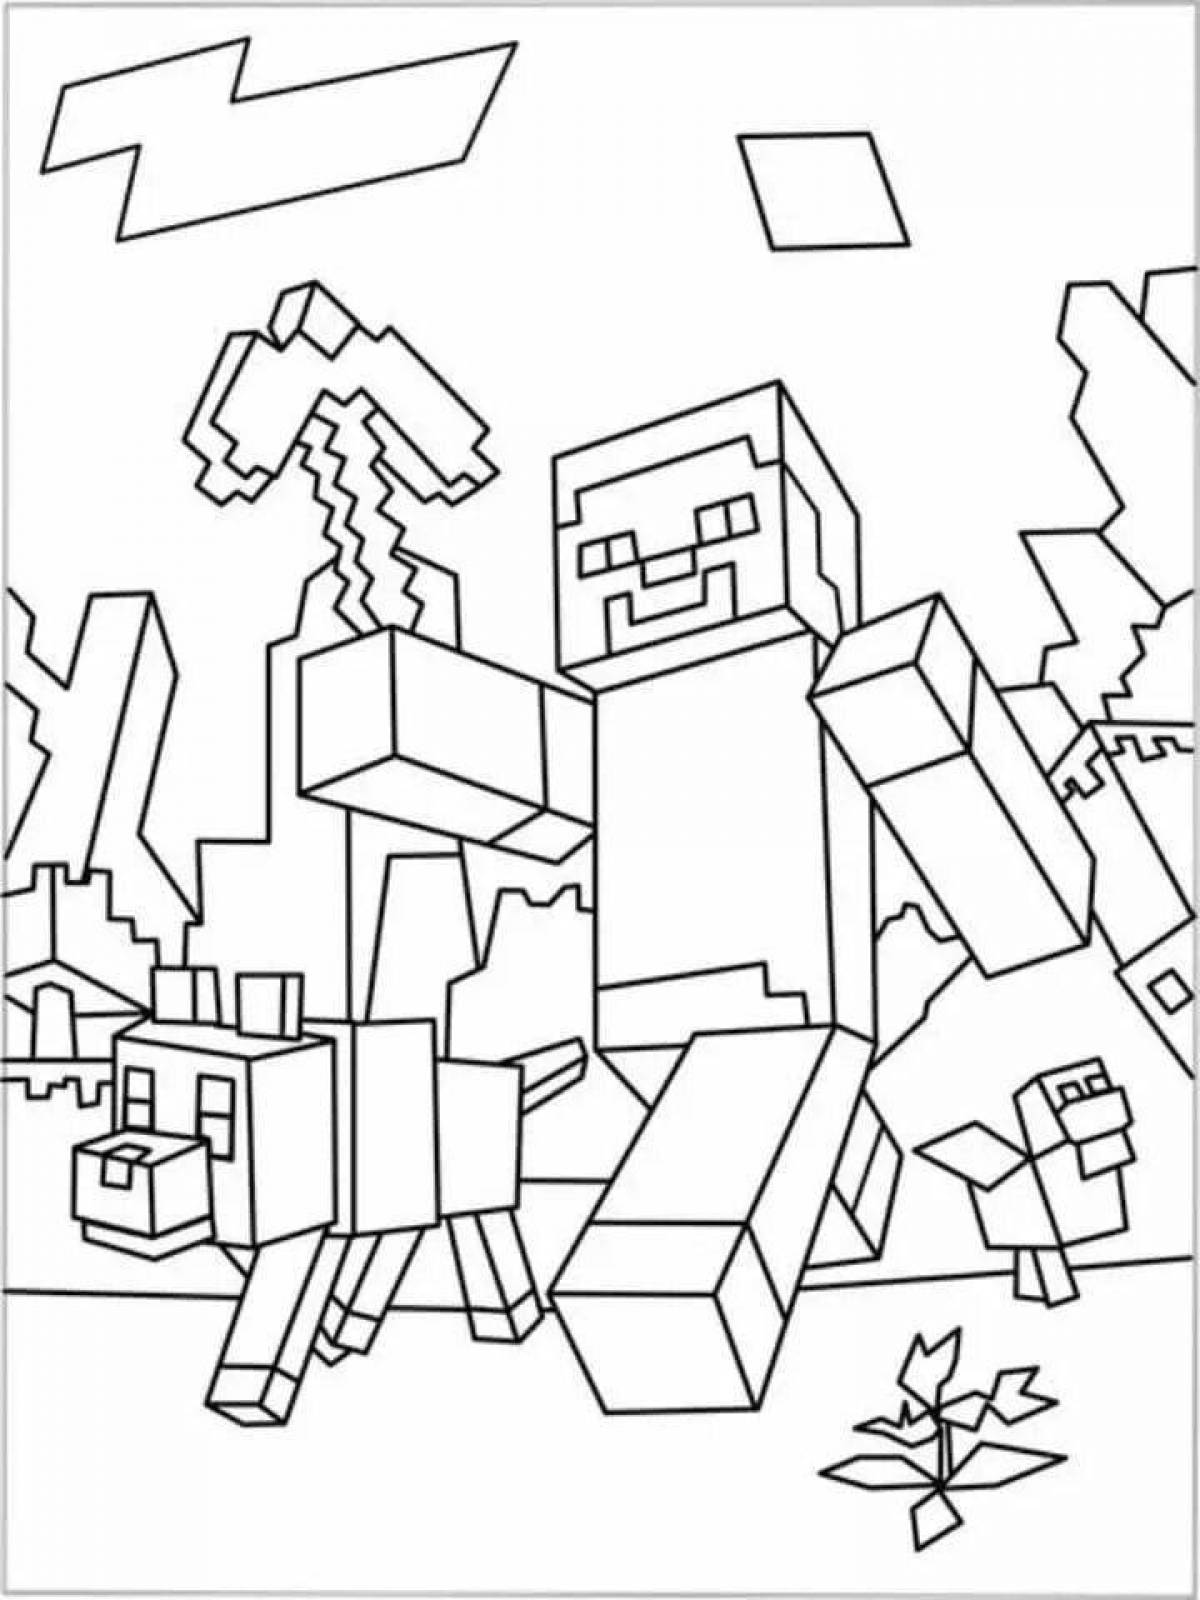 Playful minecraft printable coloring page